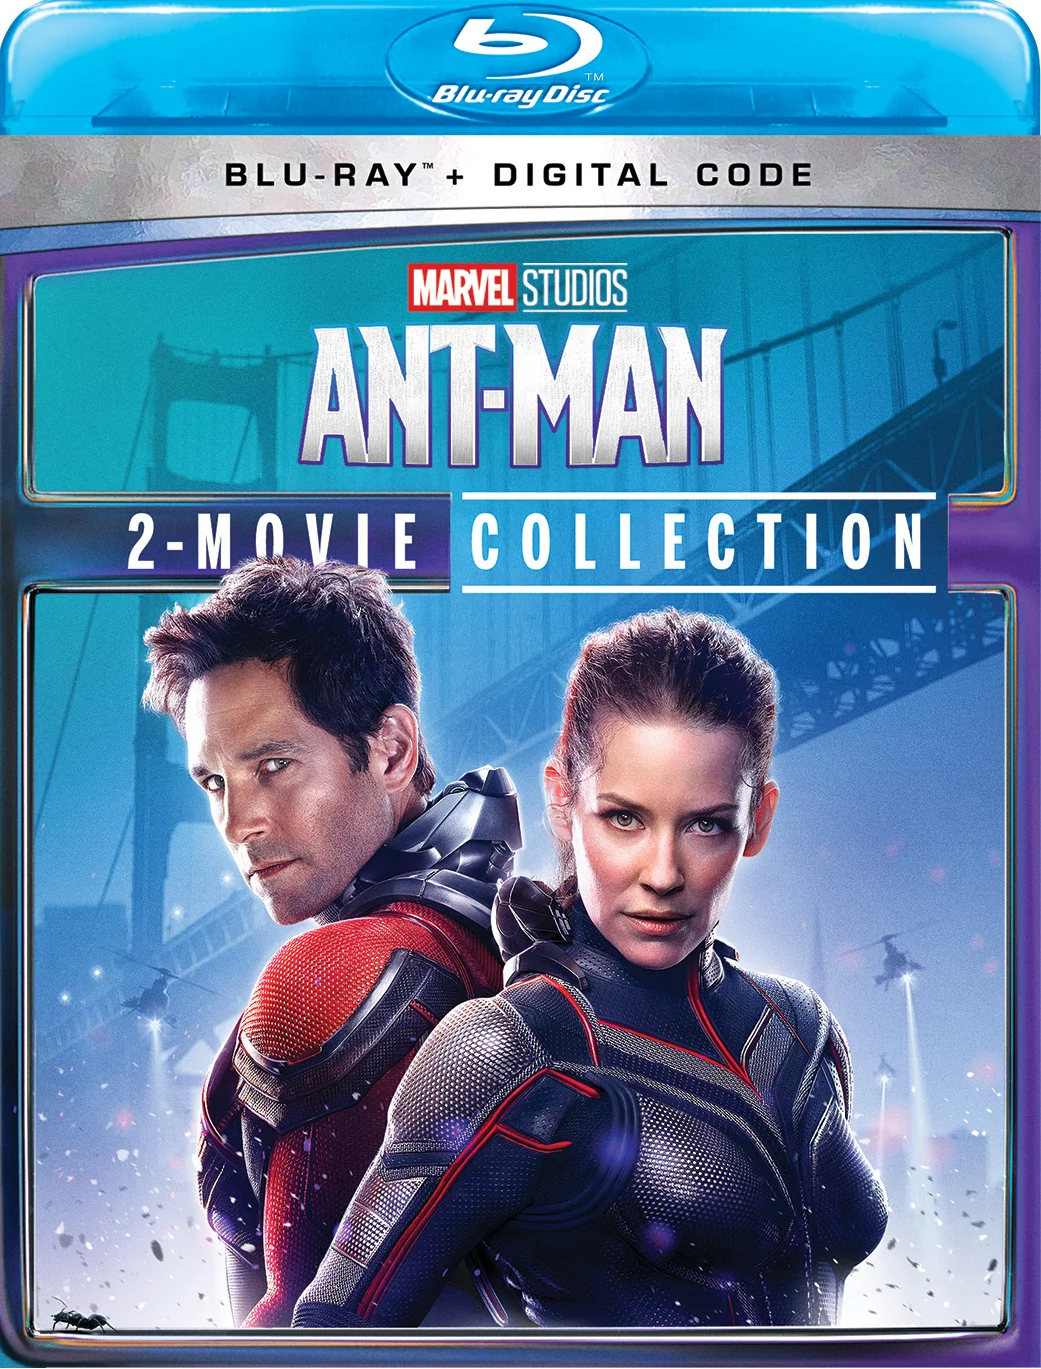 Ant-Man and the Wasp – 2 Movie Collection (Blu-ray) on MovieShack